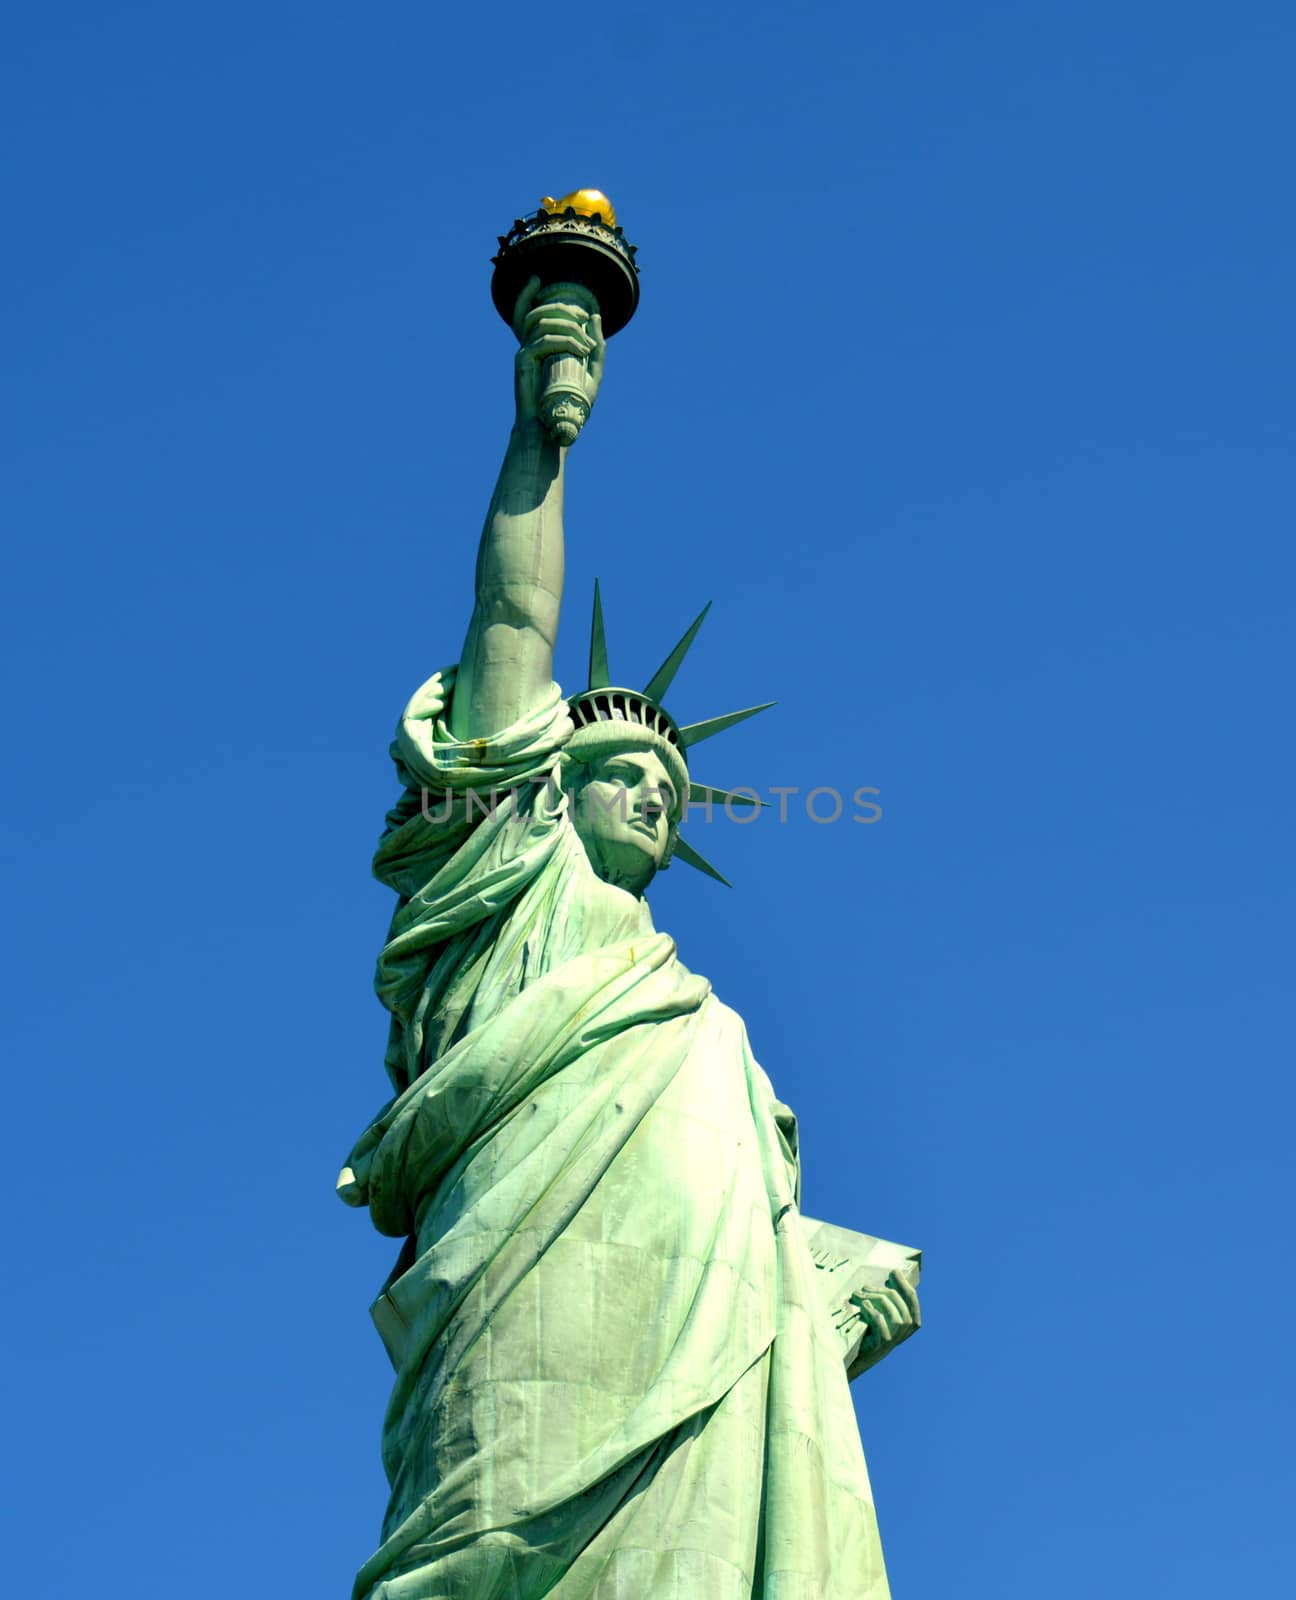 Statue of Liberty - New York City  - 66 by RefocusPhoto